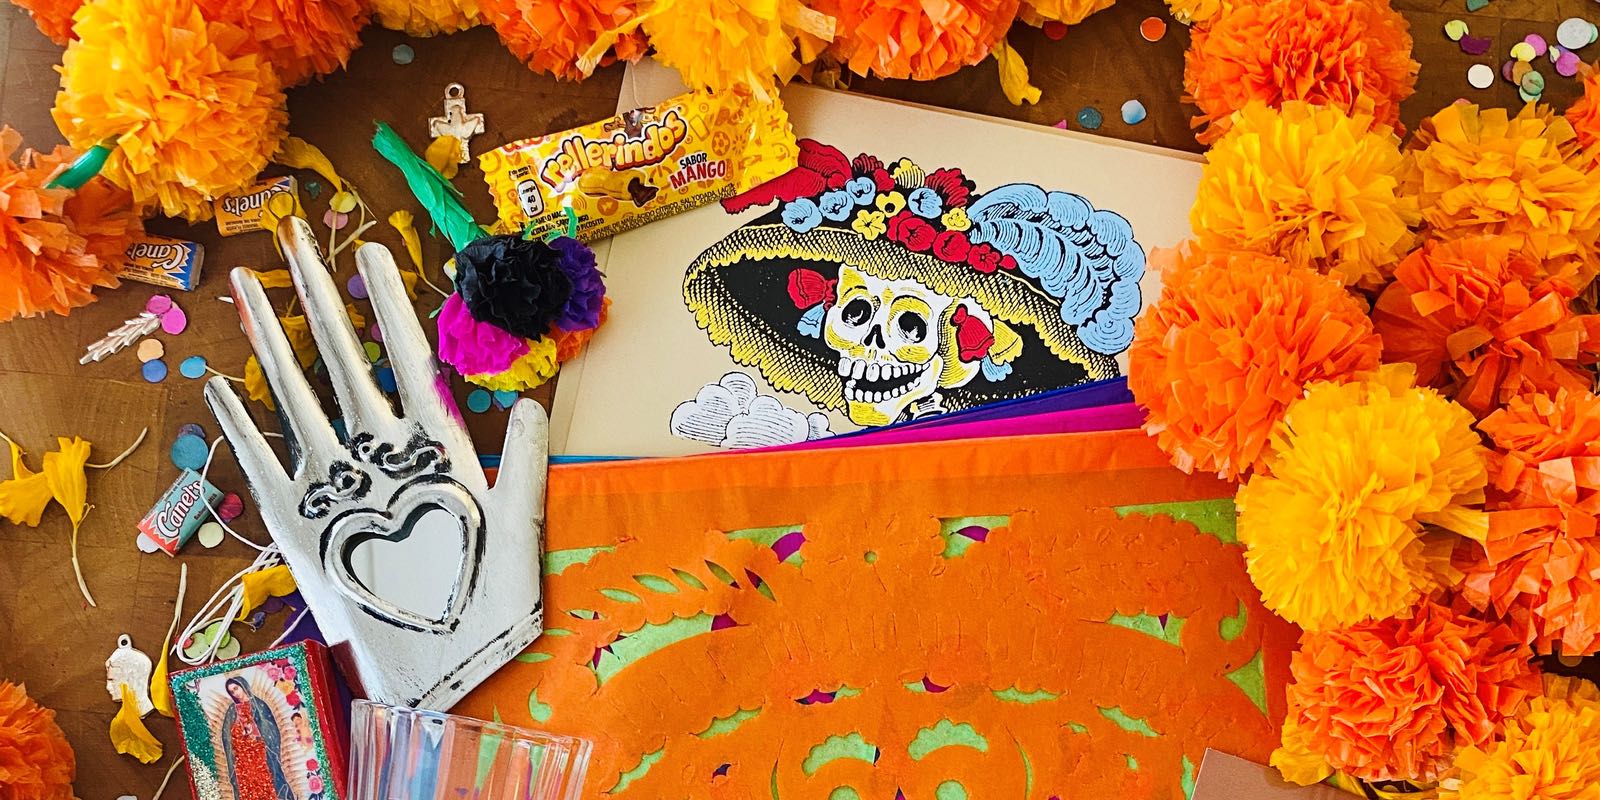 Day of the Dead altar supplies from Artlexia